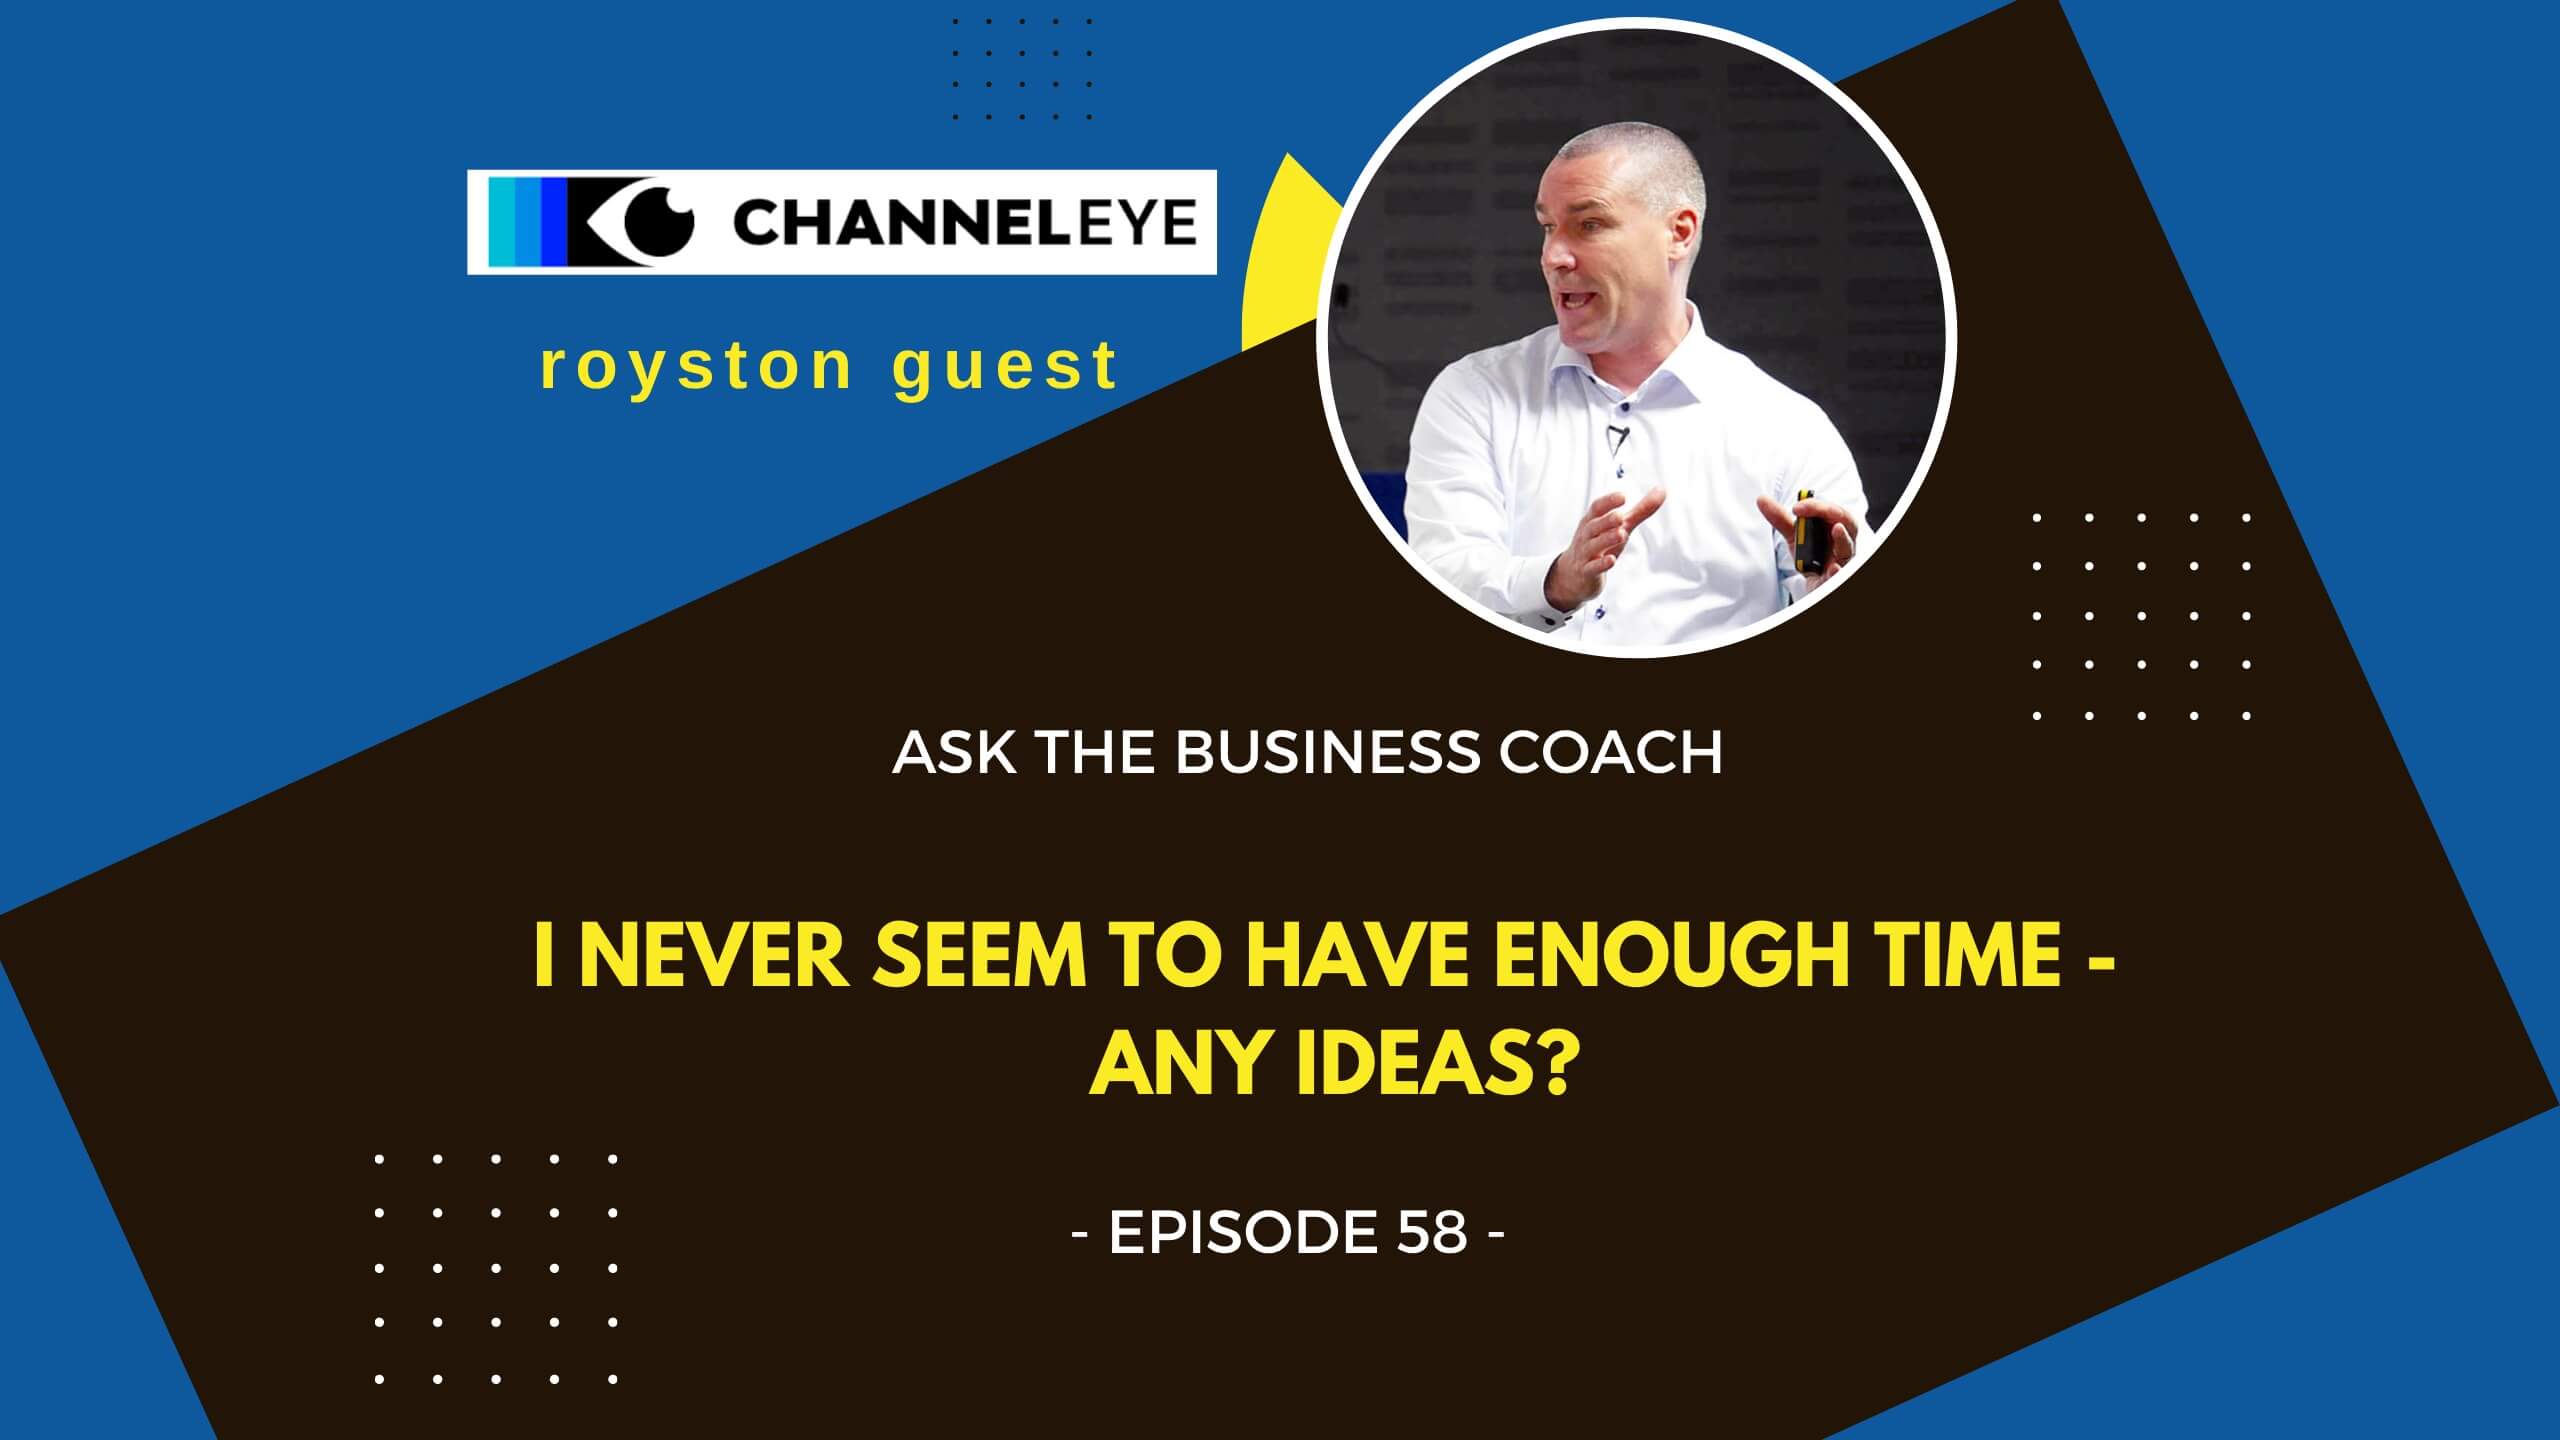 Ask the business coach episode 58